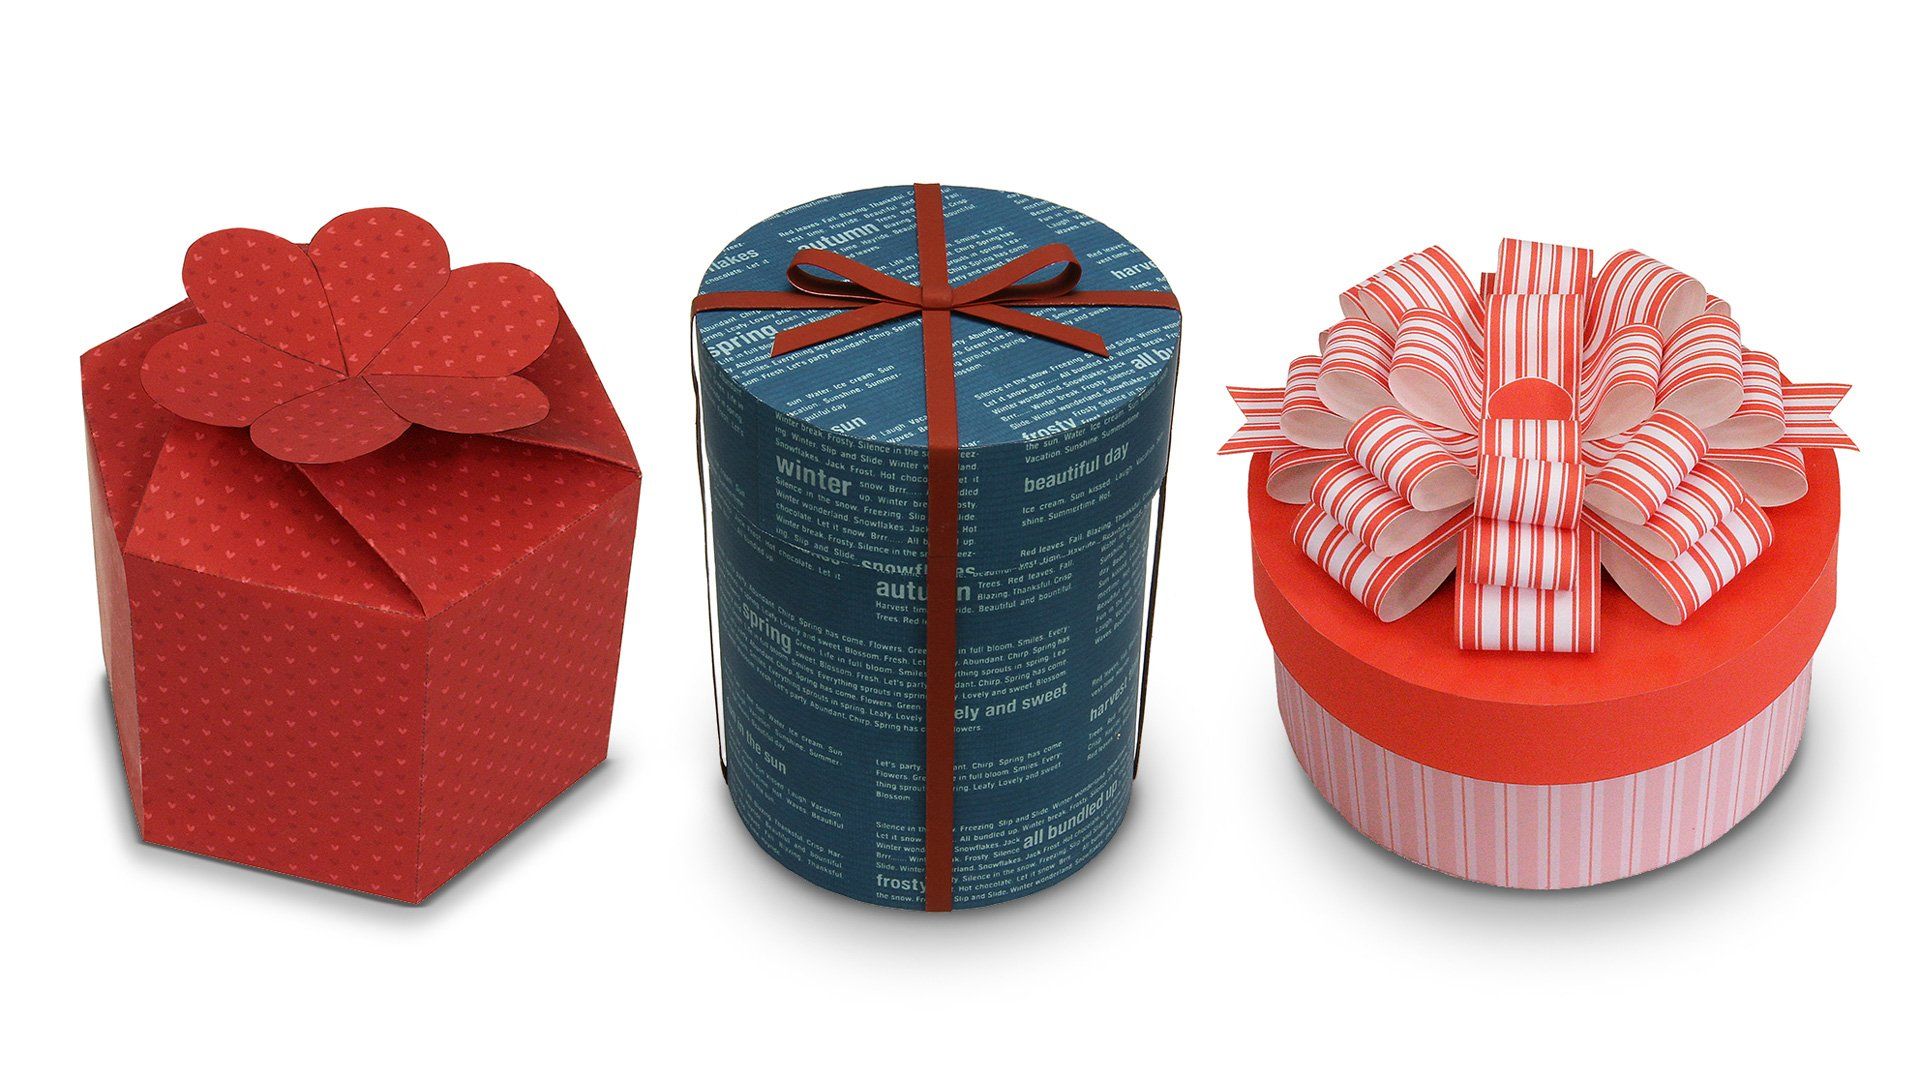 Three homemade decorative gift boxes in different shapes.